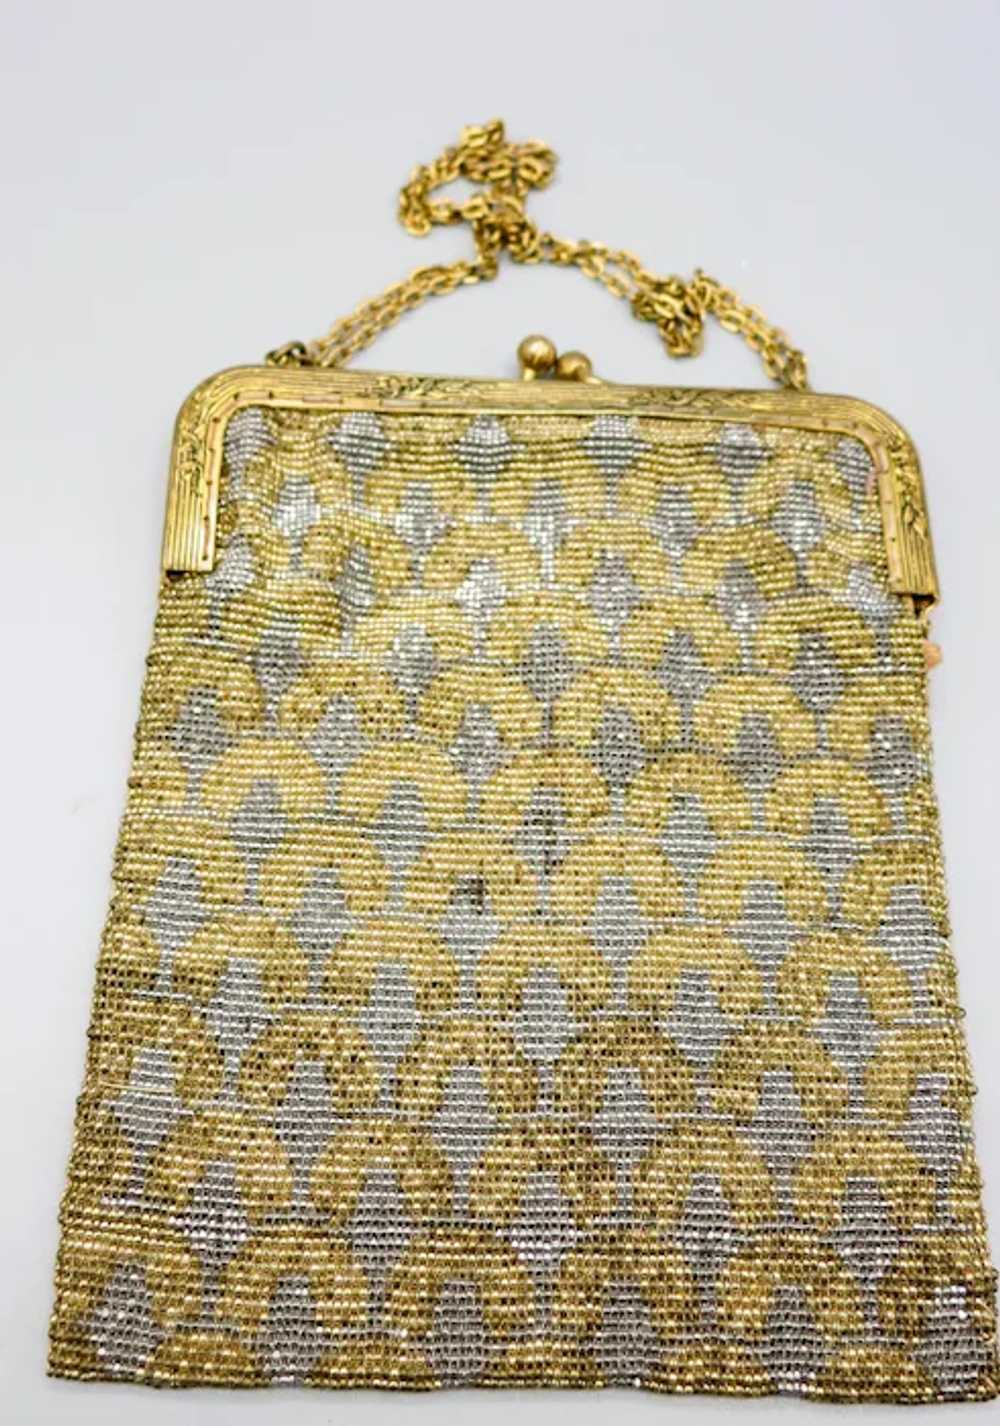 ANTIQUE French Micro Steel Bead Purse - image 8